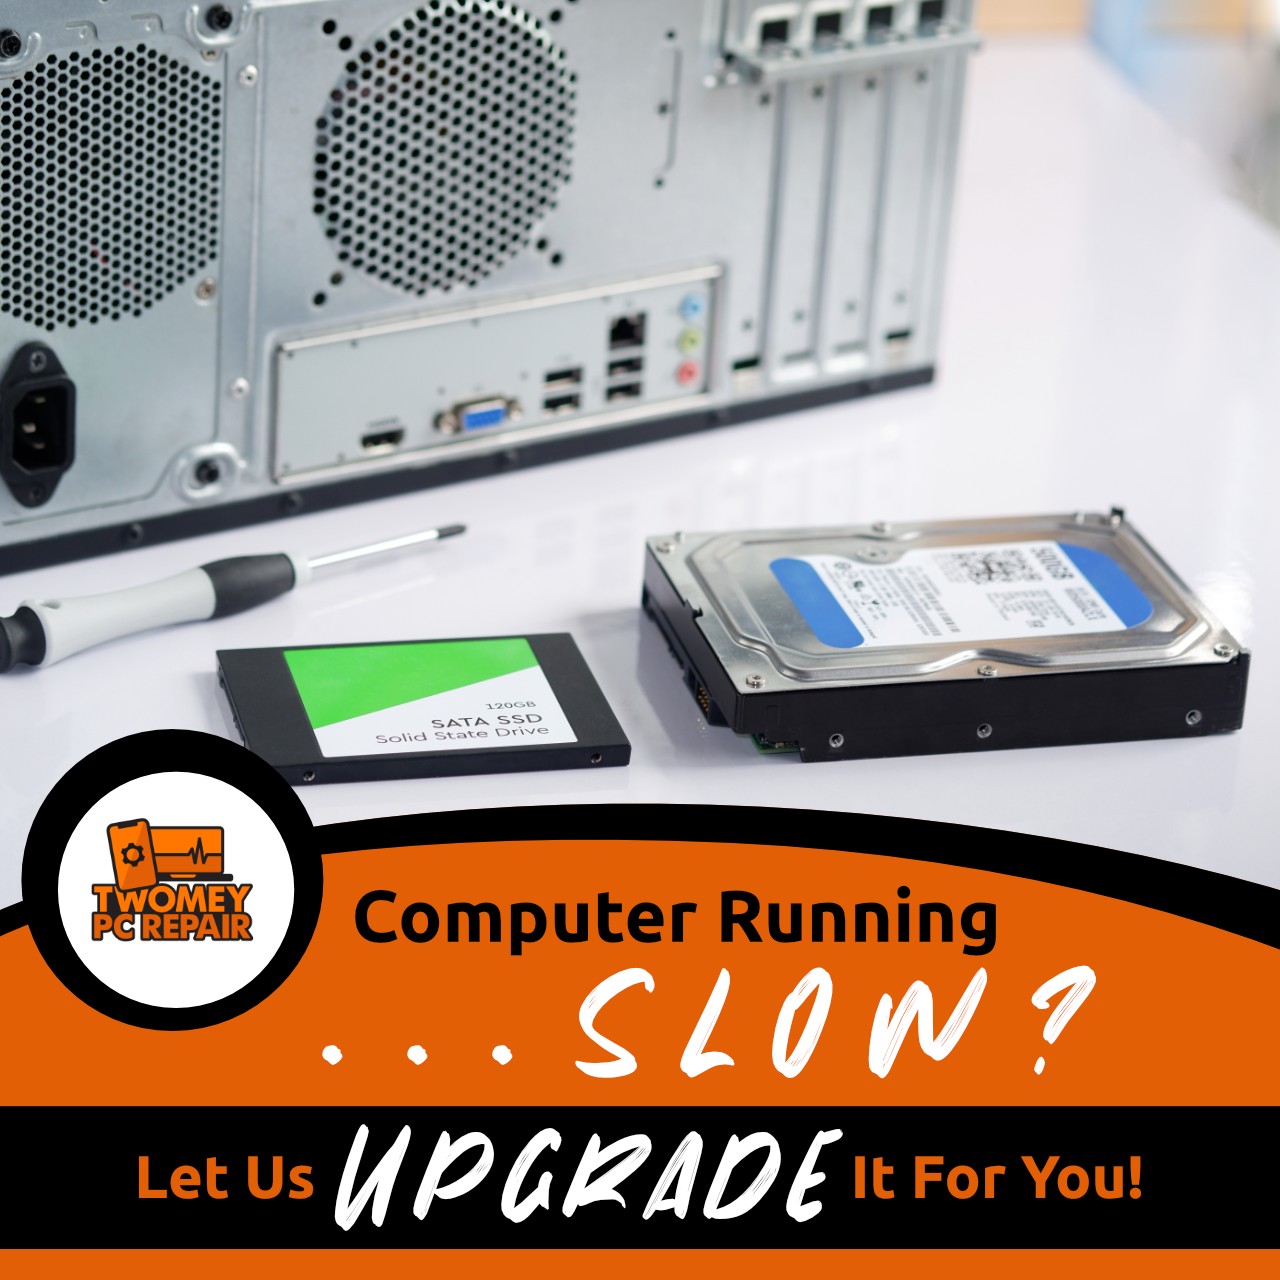 Computer running slow? Let us repair and upgrade for you.